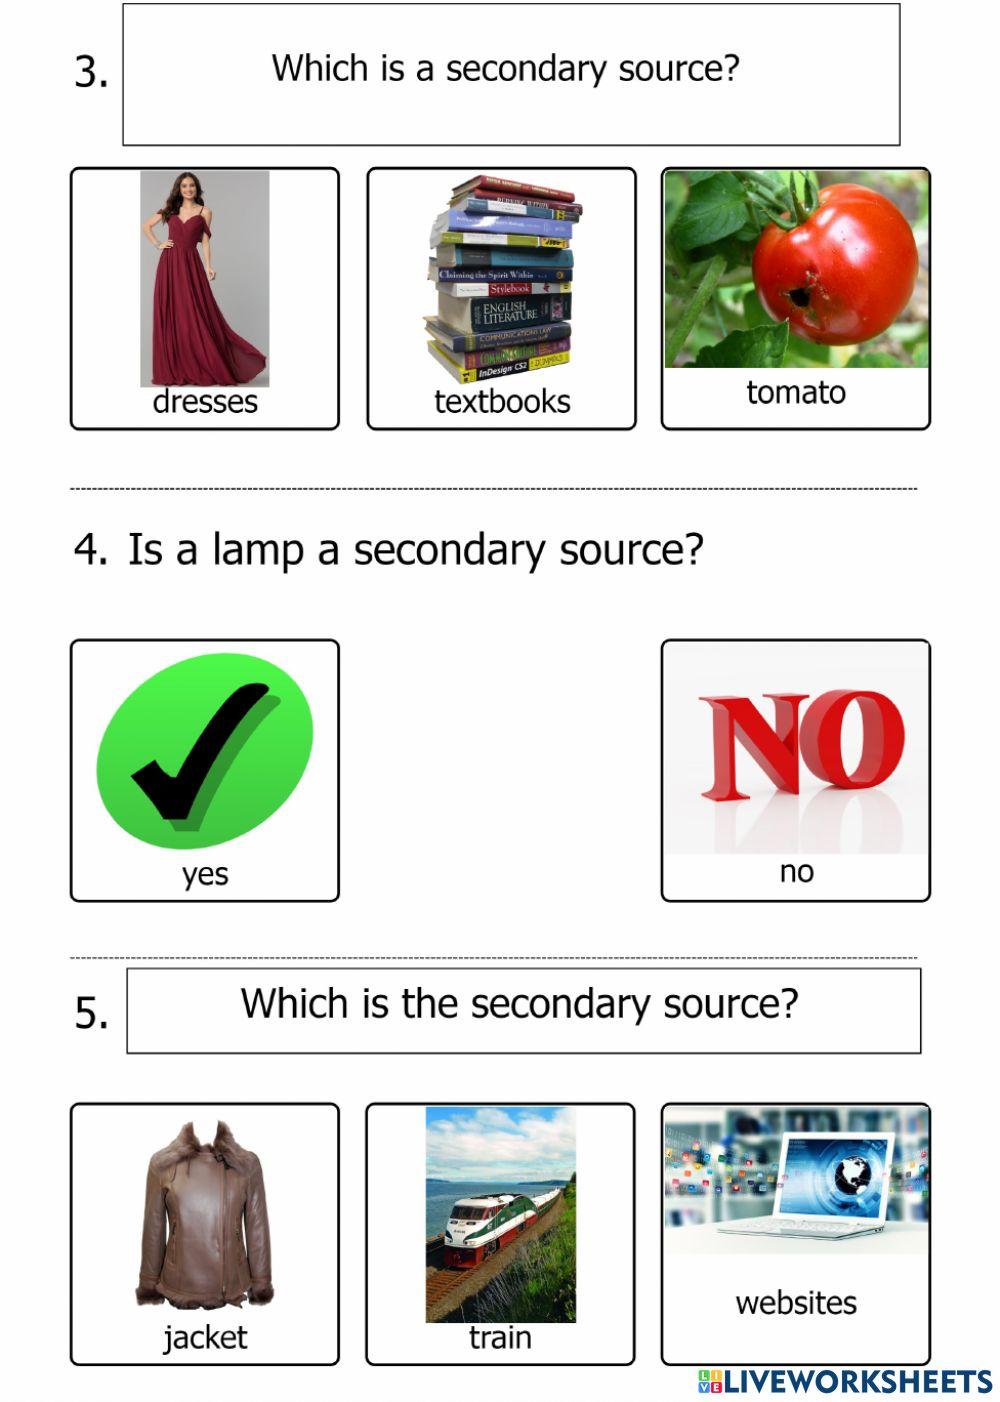 Secondary sources